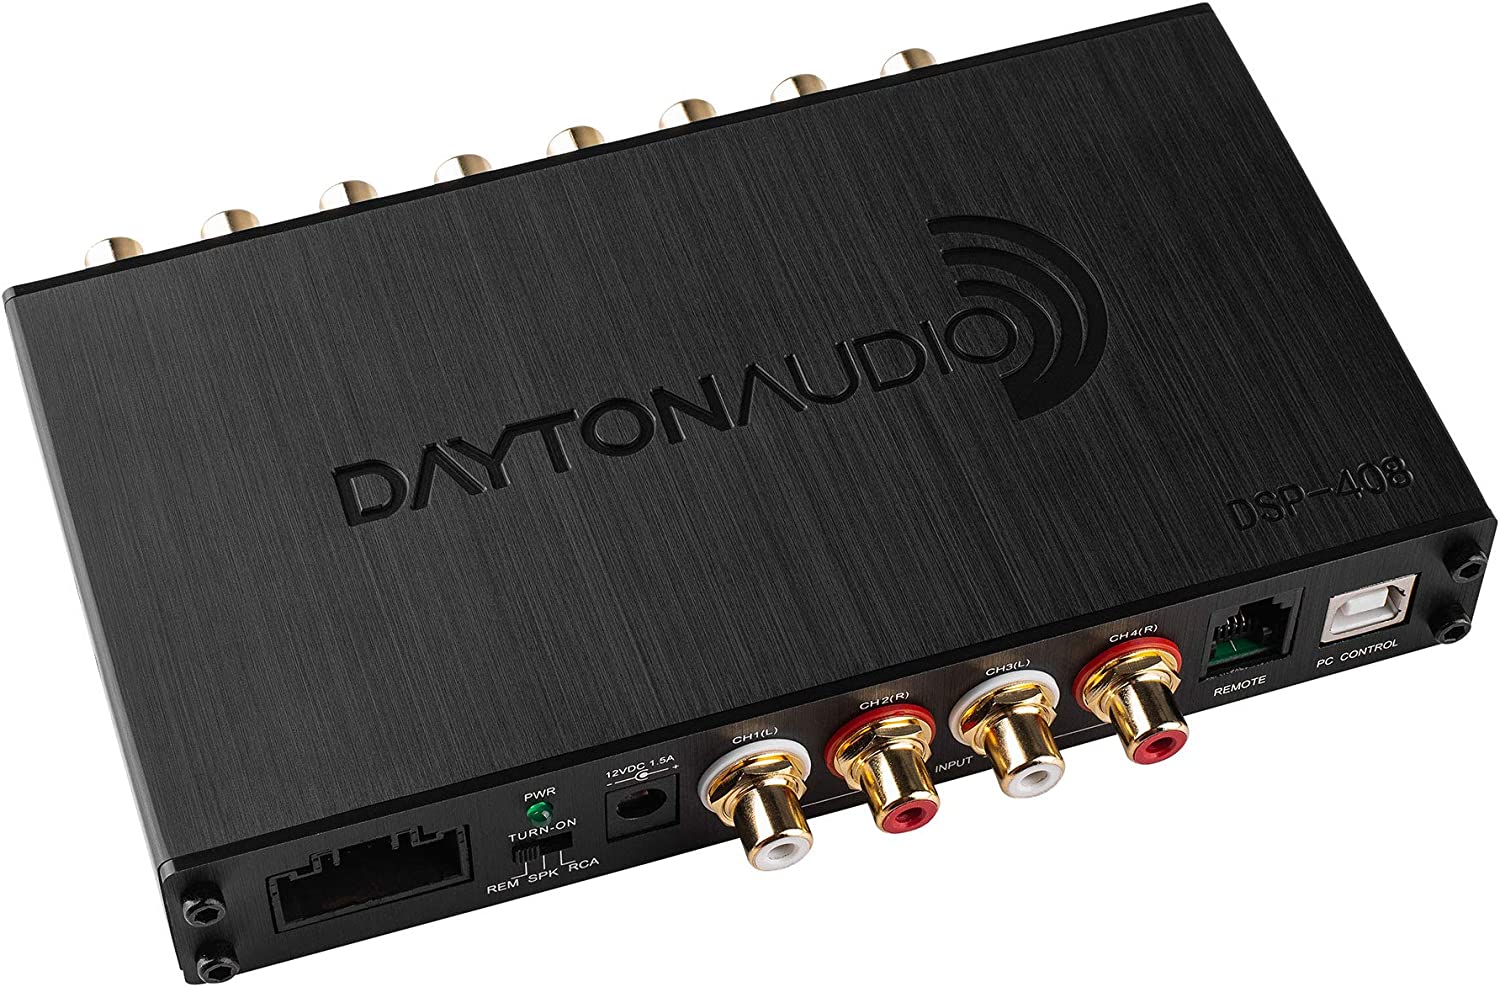 [Used] Dayton Audio DSP-408 4x8 DSP Digital Signal Processor for Home and Car Audio